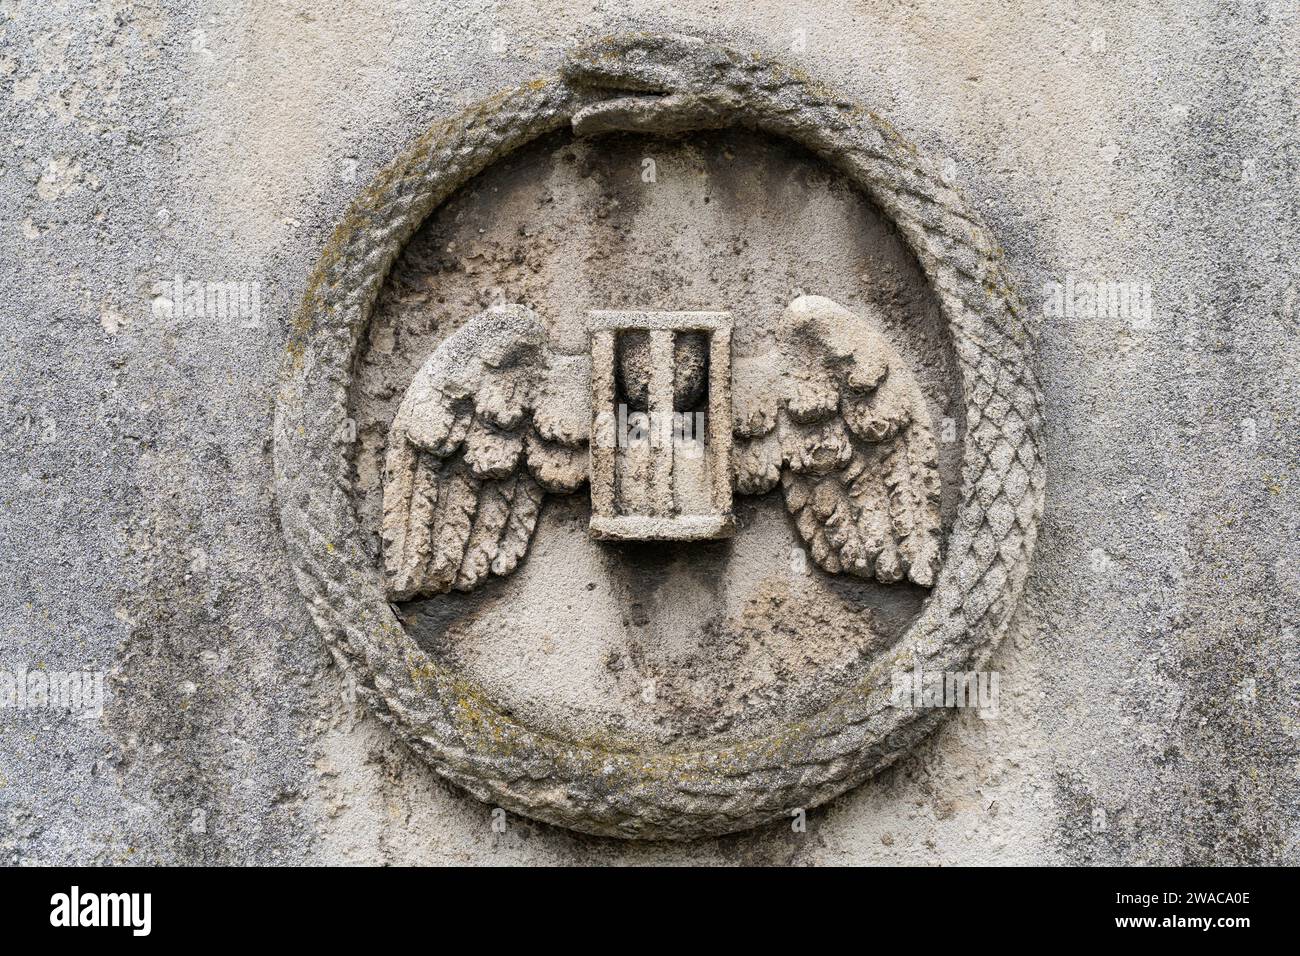 Ancient Christian symbols covering old stone tombs Stock Photo